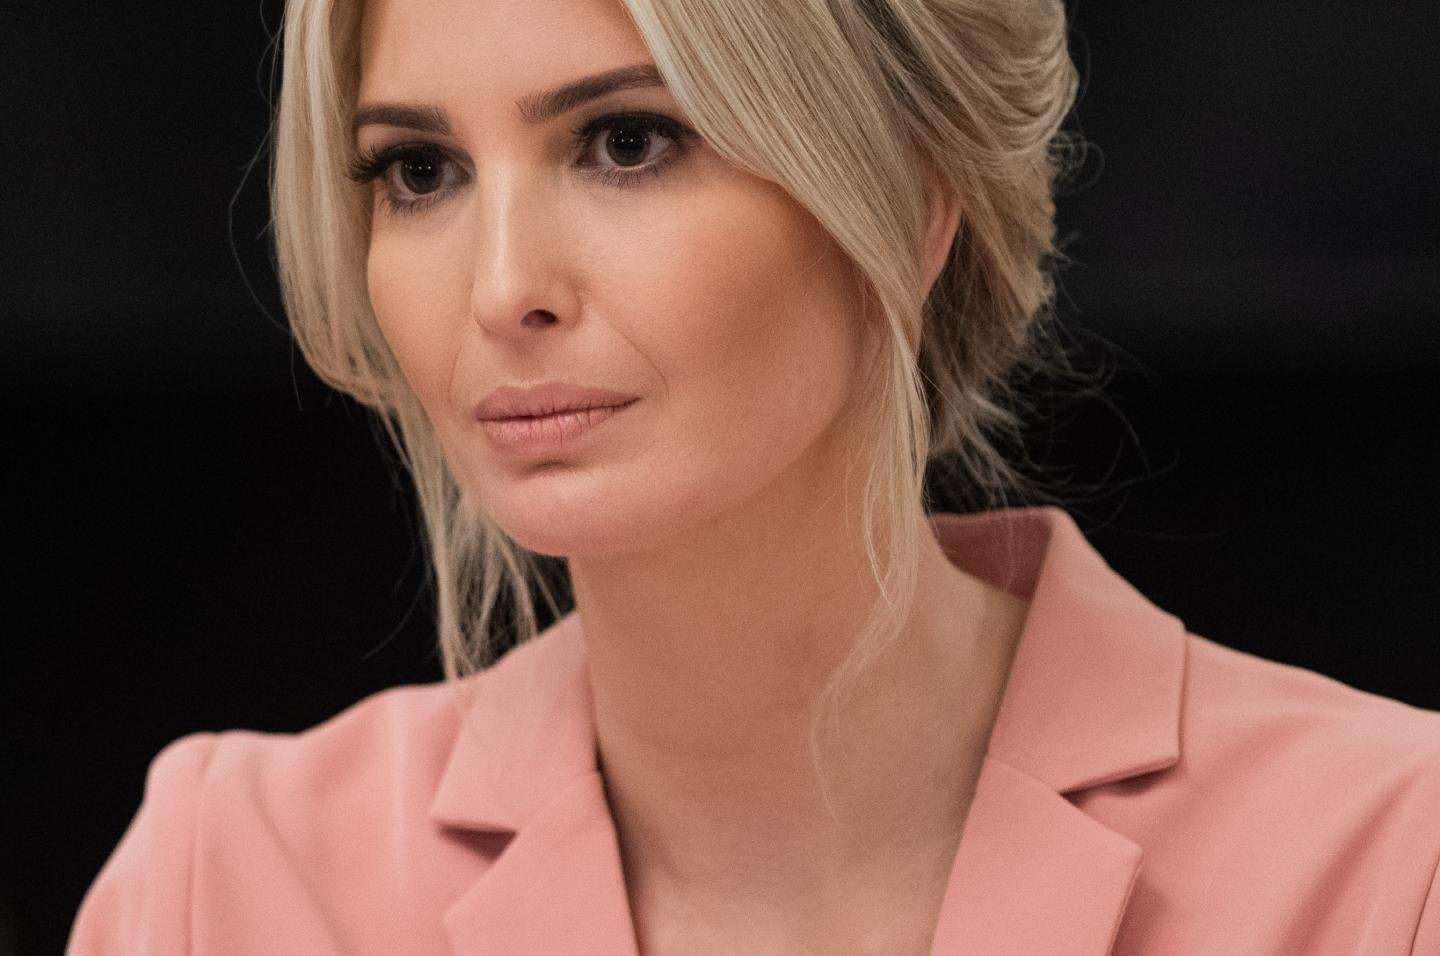 image for Ivanka Trump Should Surrender Security Clearance Immediately, CNN Contributor Says: ‘She Is Living an Embarrassing Lie’